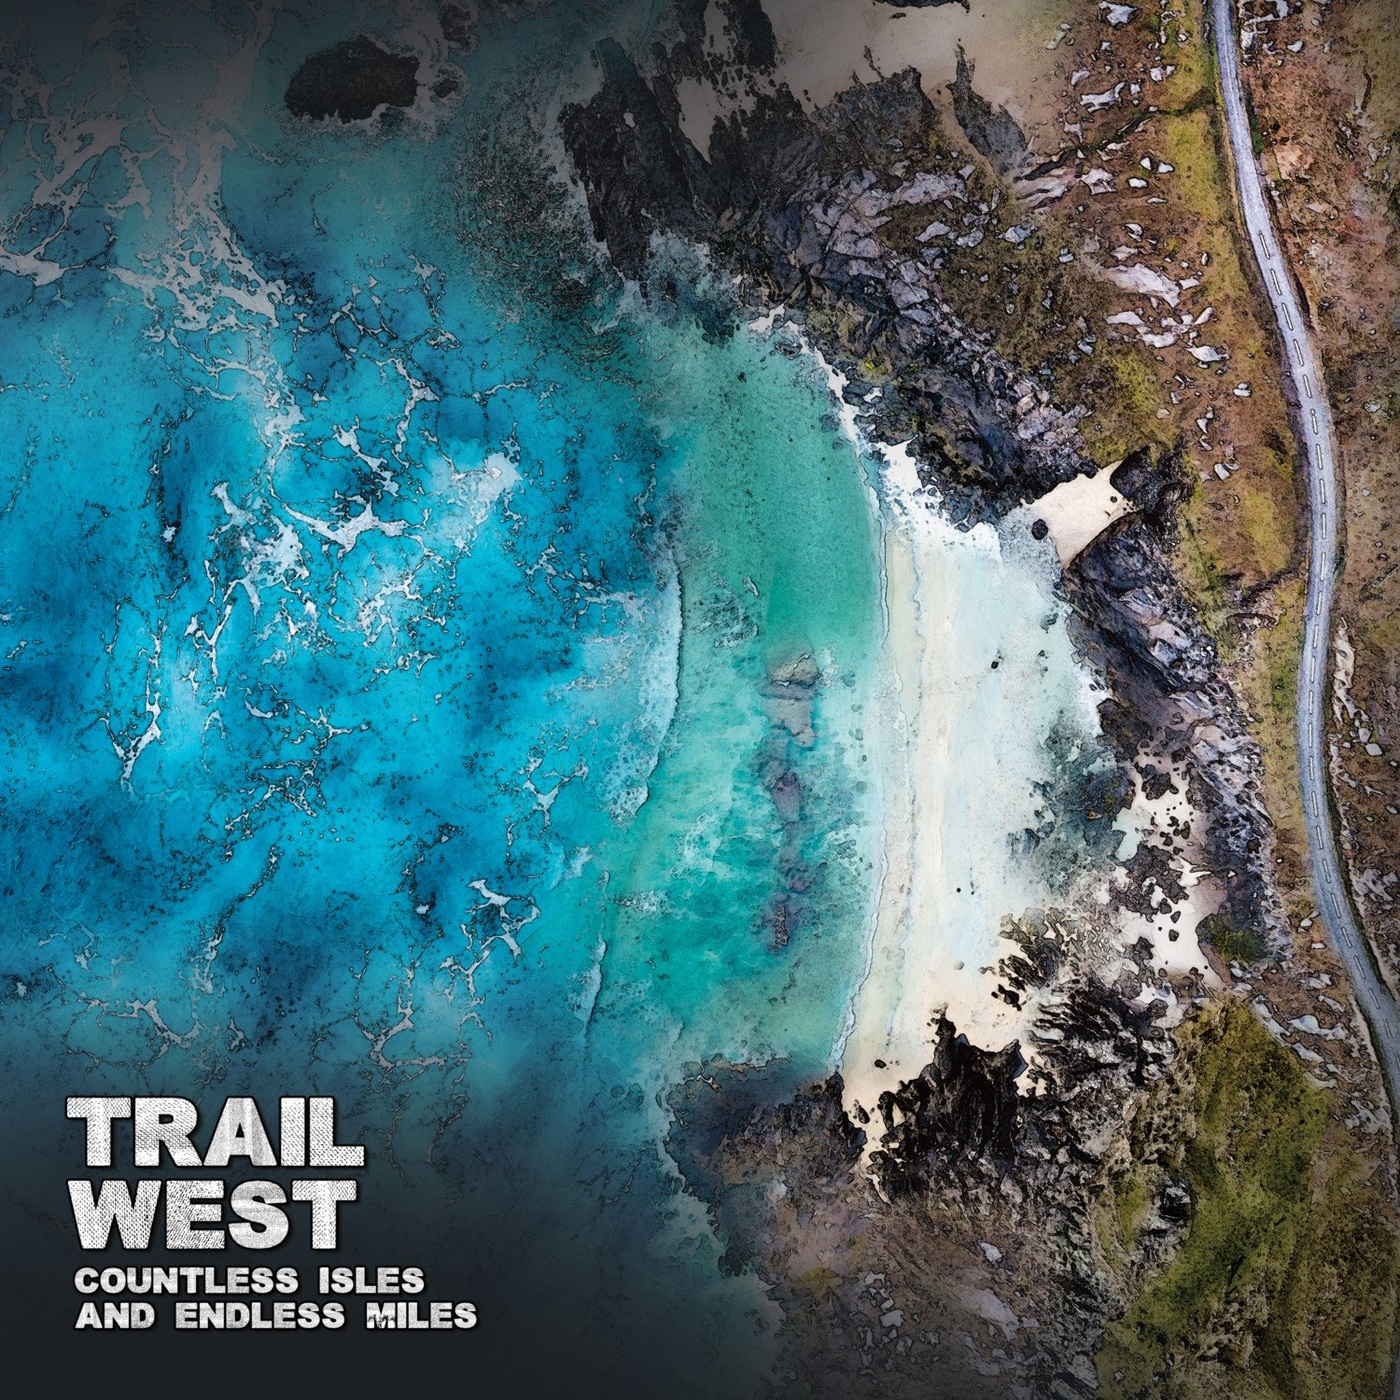 Trail West - 2021 - Countless Isles and Endless Miles